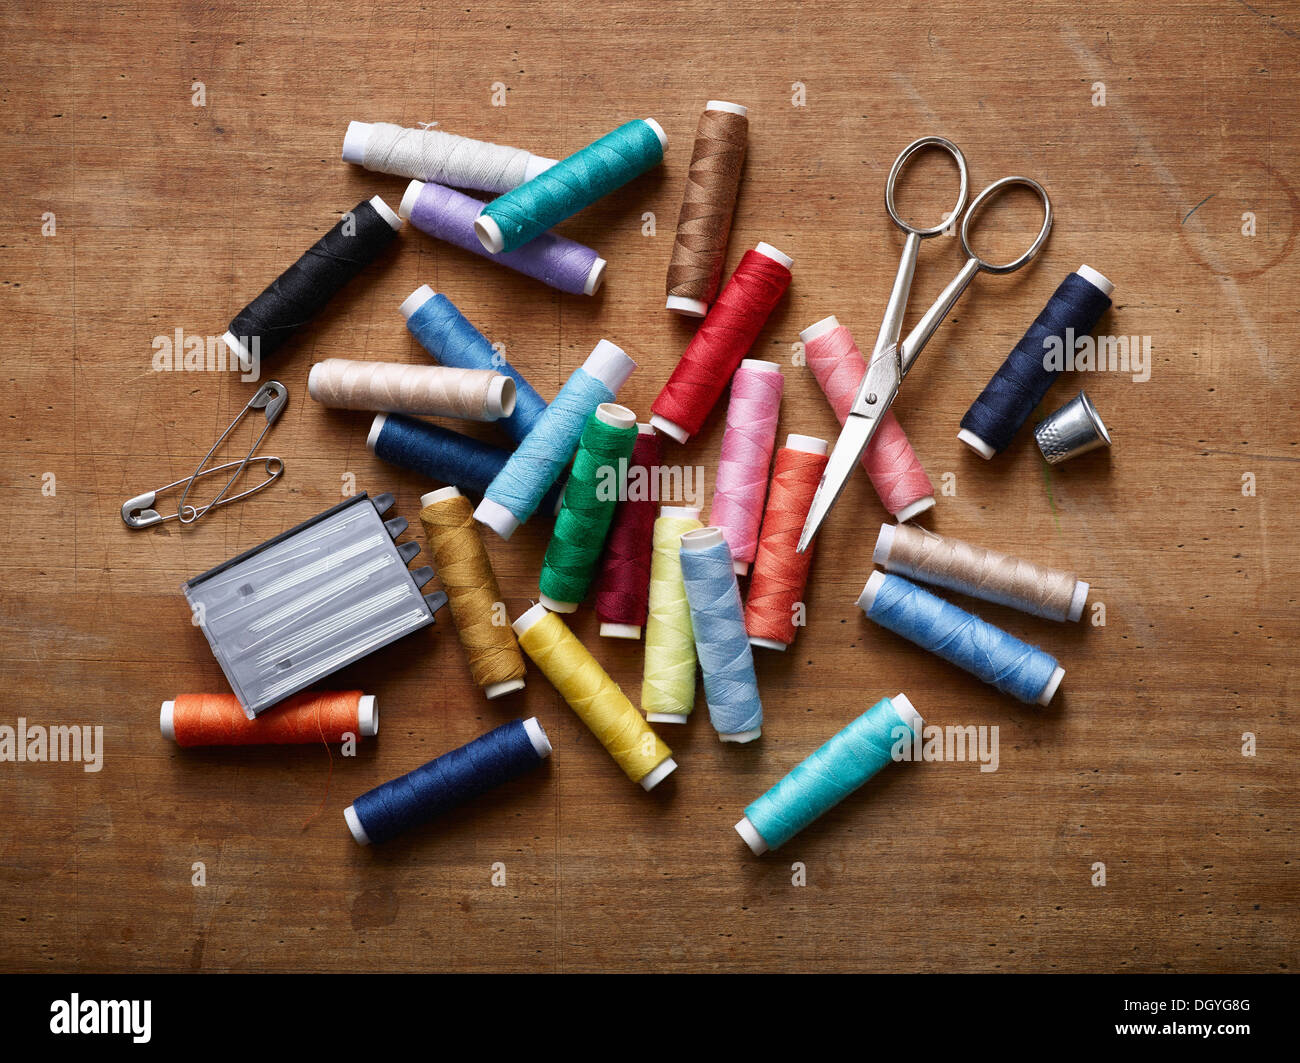 Heap of multi-coloured sewing pins on a white background, Stock image